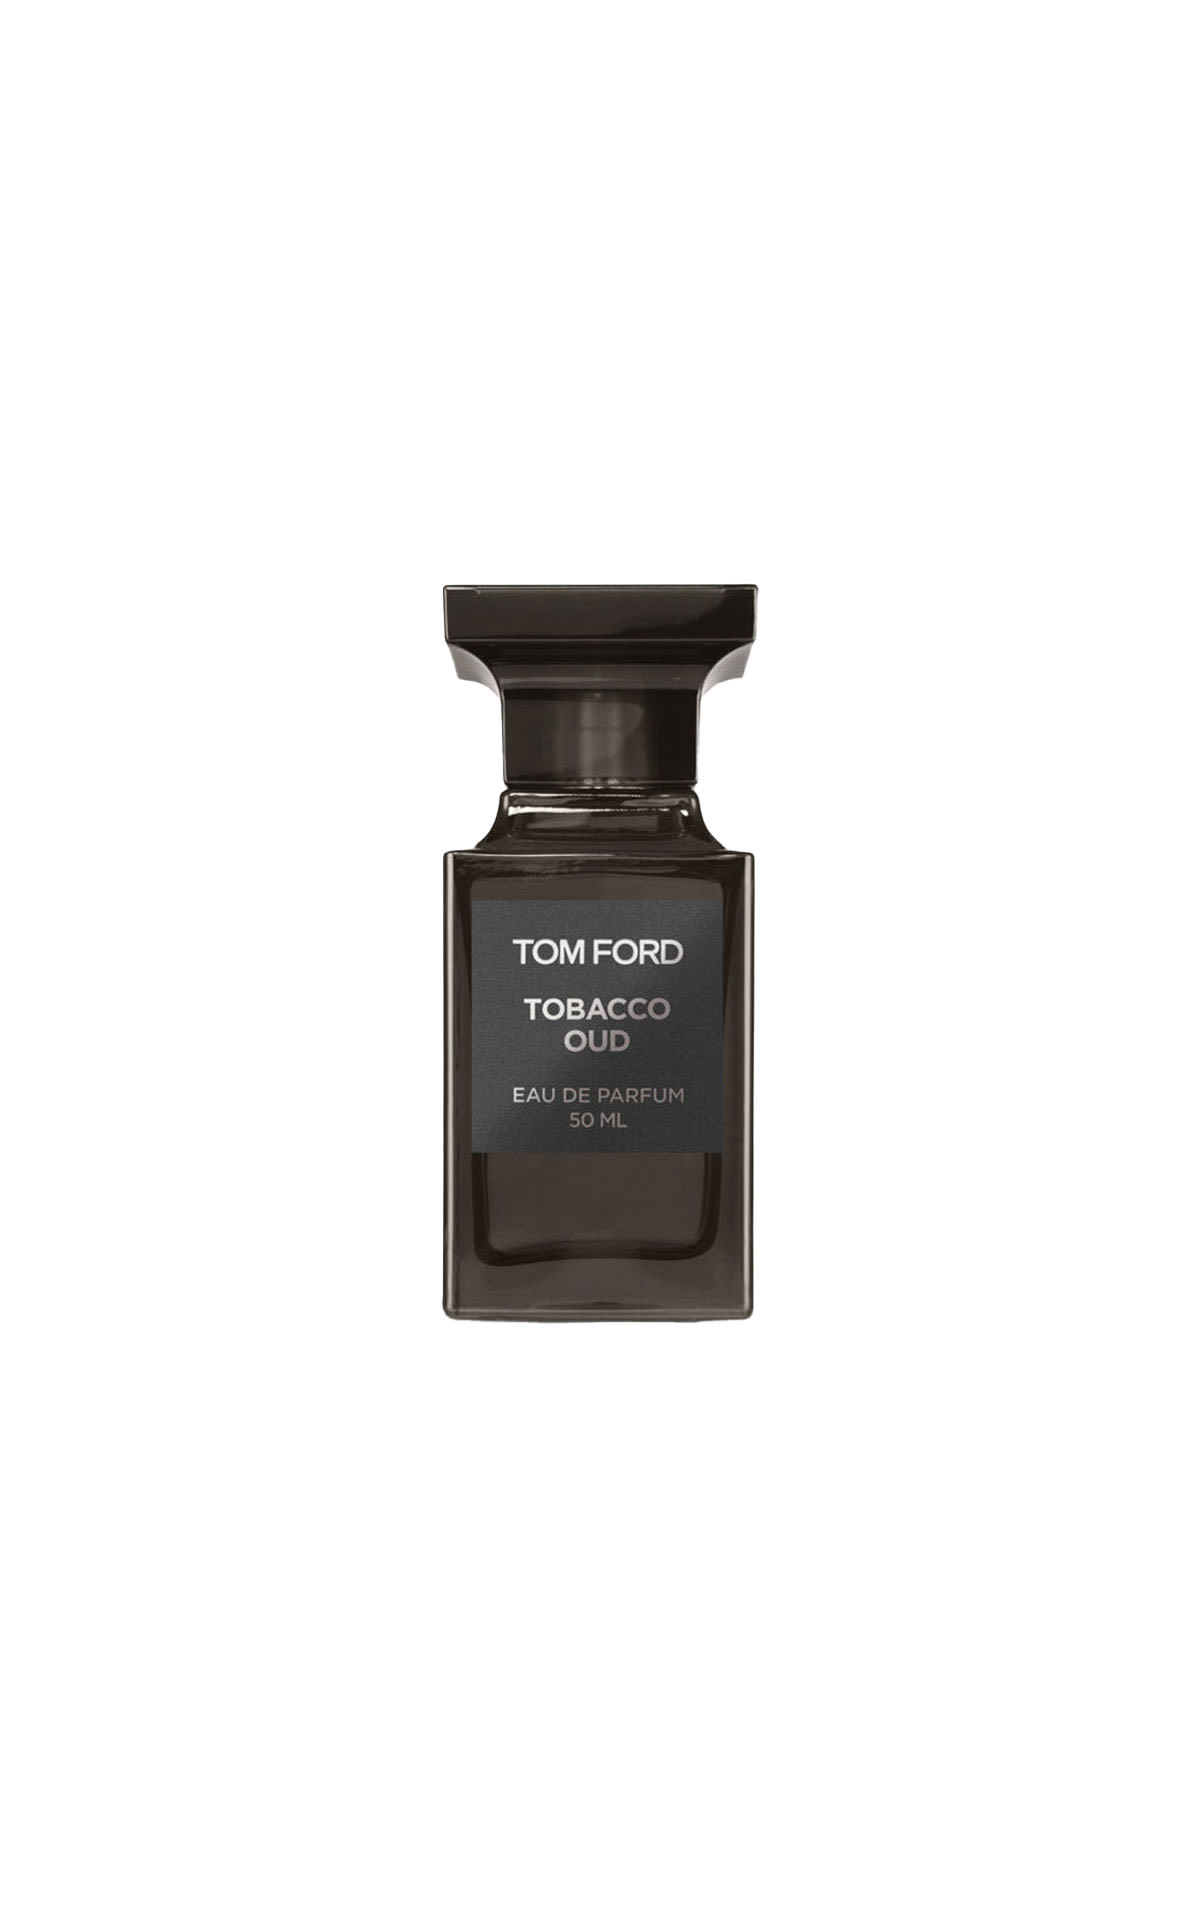 The Cosmetics Company Store Tom Ford tobacco oud from Bicester Village